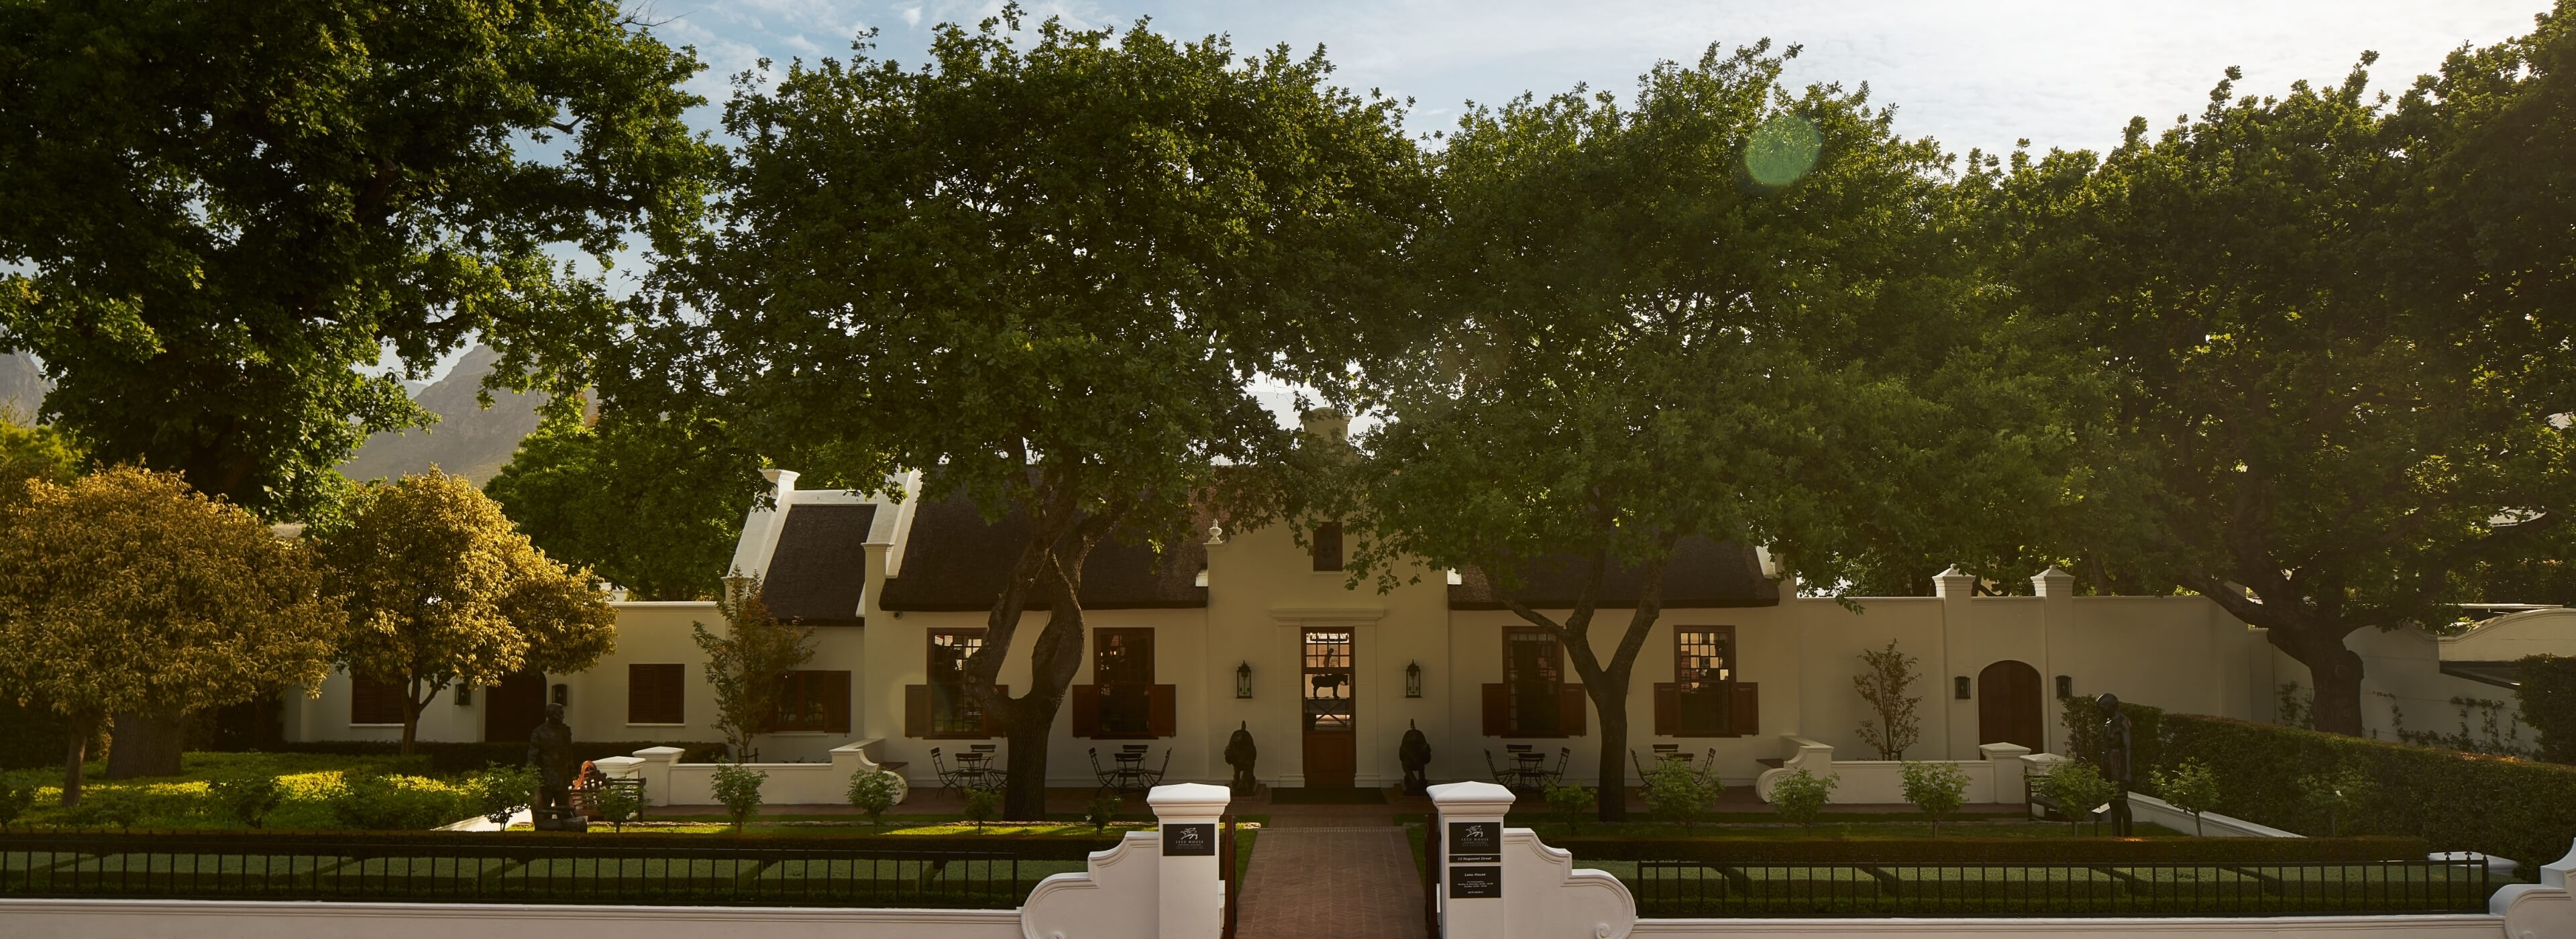 Leeu Collection | South Africa | OFFERS & EXPERIENCES Exclusively Yours, Leeu House